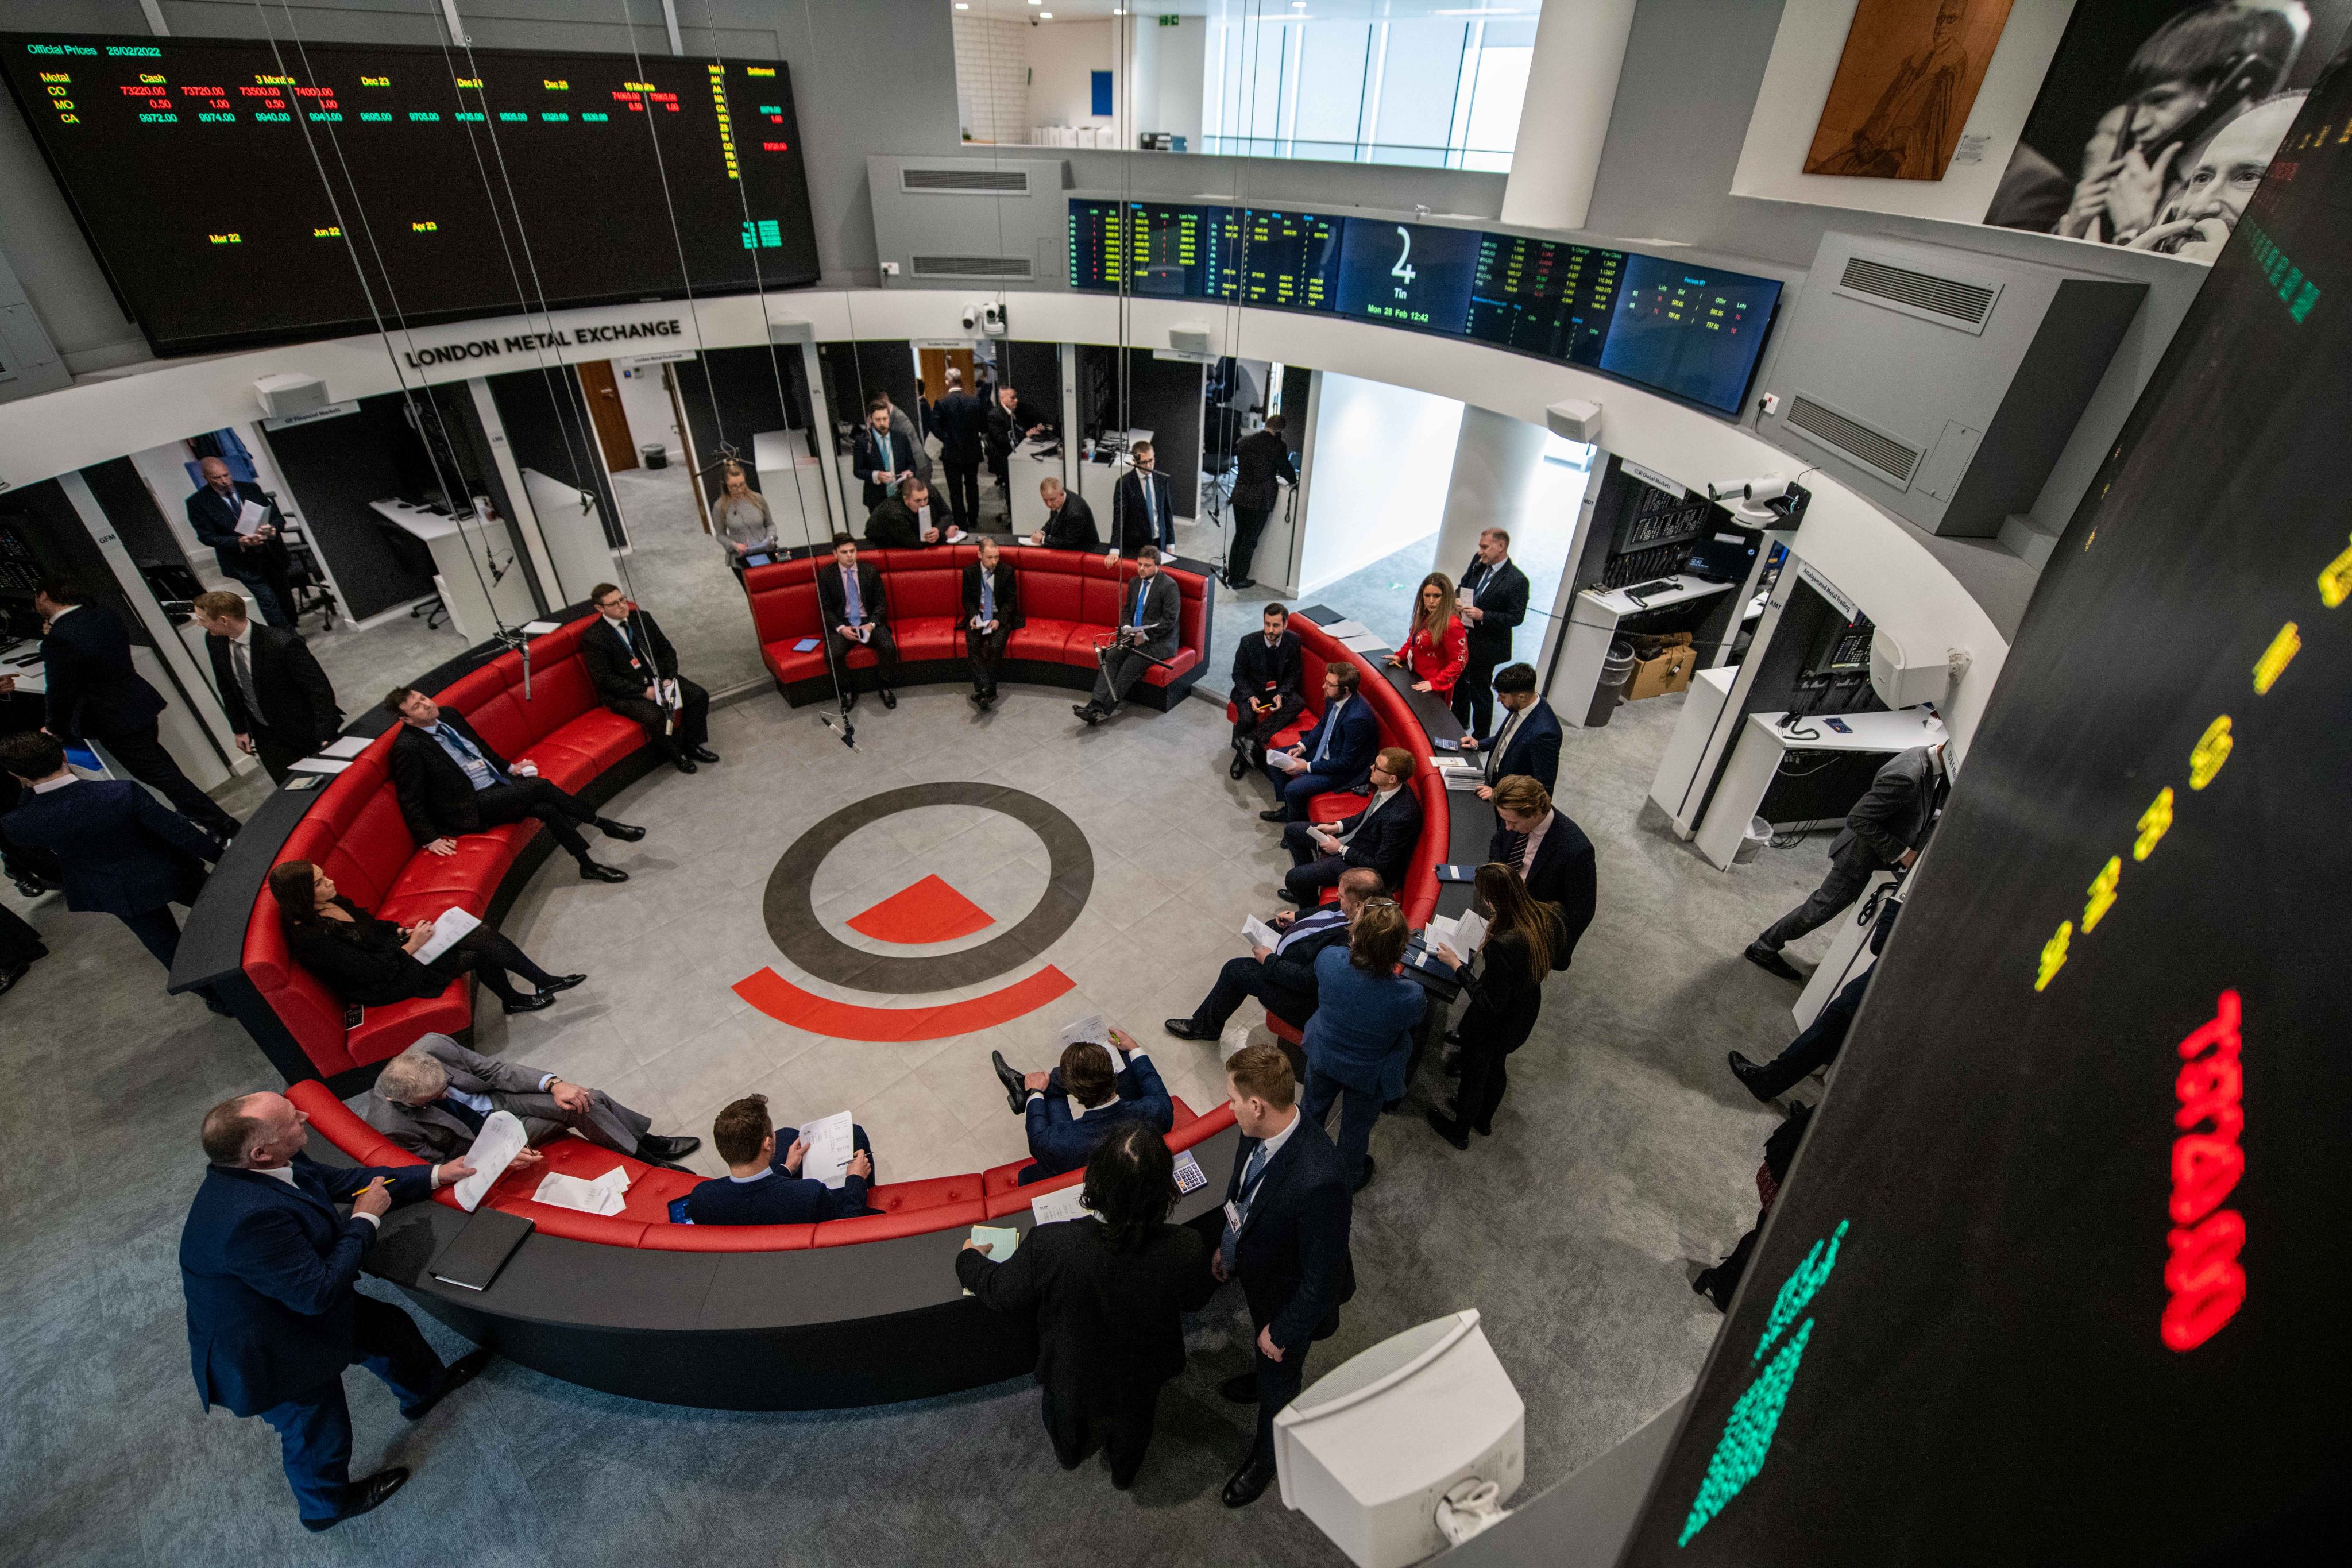 Traders, brokers and clerks on the trading floor of the open outcry pit at the London Metal Exchange in February 2022. Photo: Bloomberg 